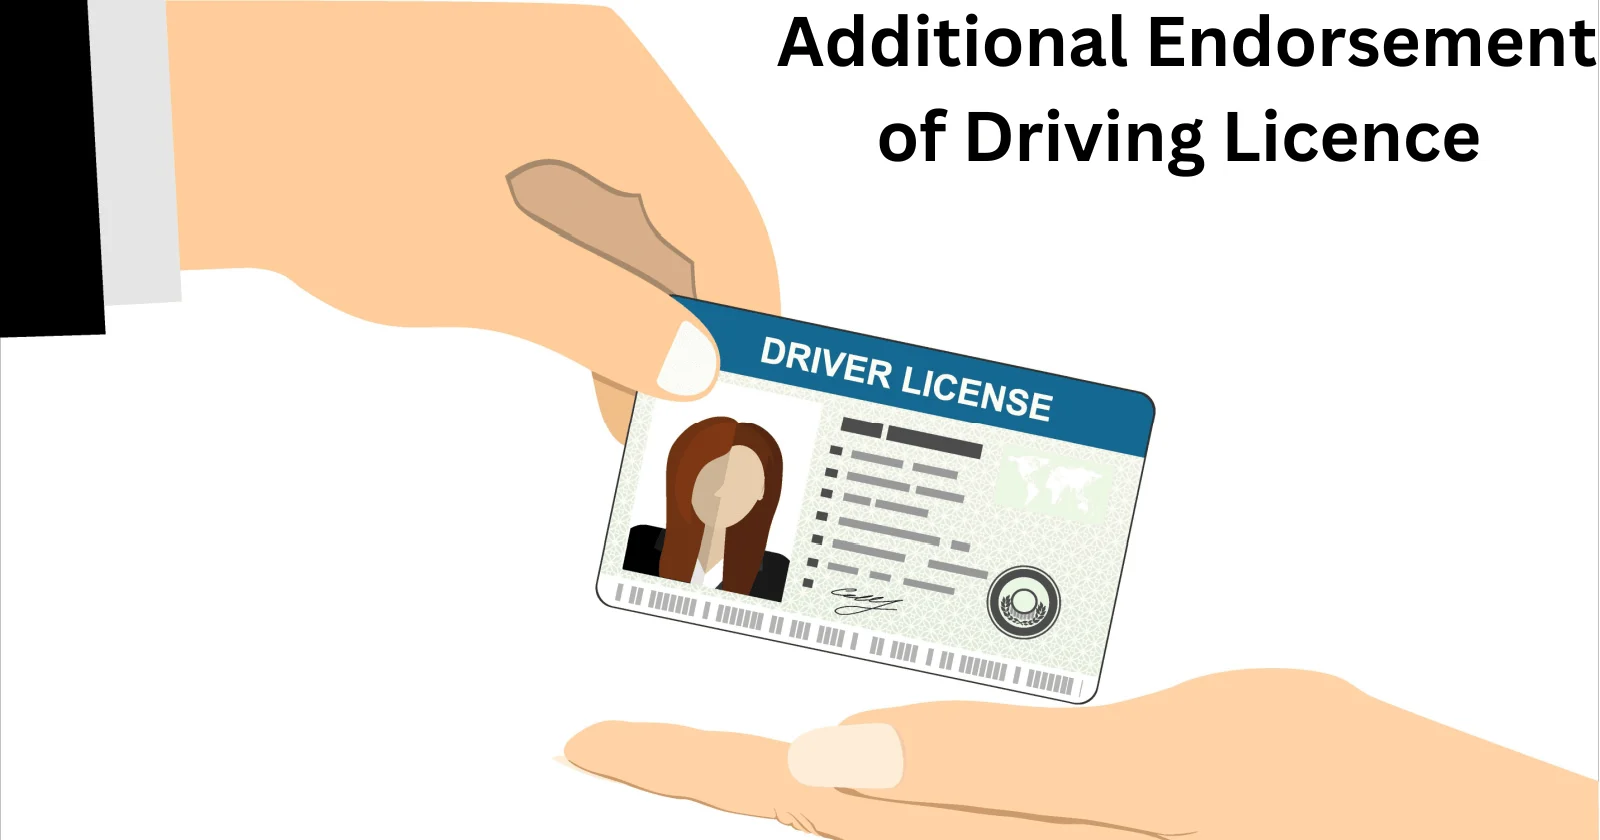 Additional Endorsement of Driving Licence (AEDL)